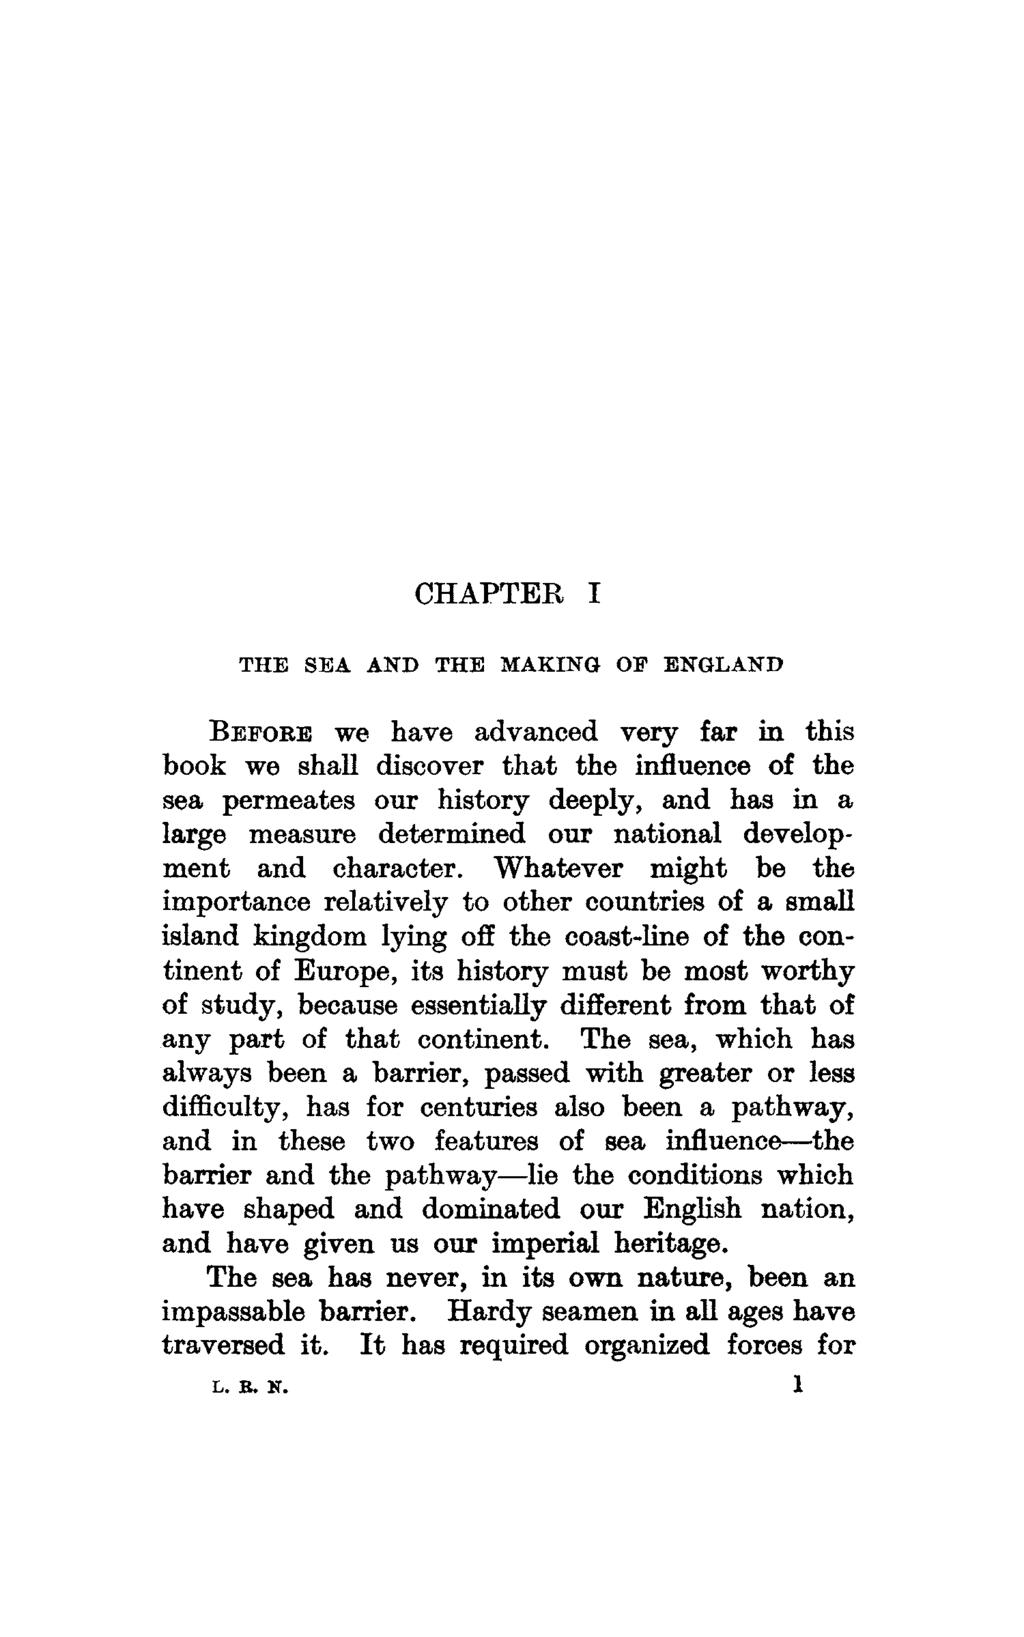 CHAPTER I THE SEA AND THE MAKING OF ENGLAND BEFORE we have advanced very far in this book we shall discover that the influence of the sea permeates our history deeply, and has in a large measure